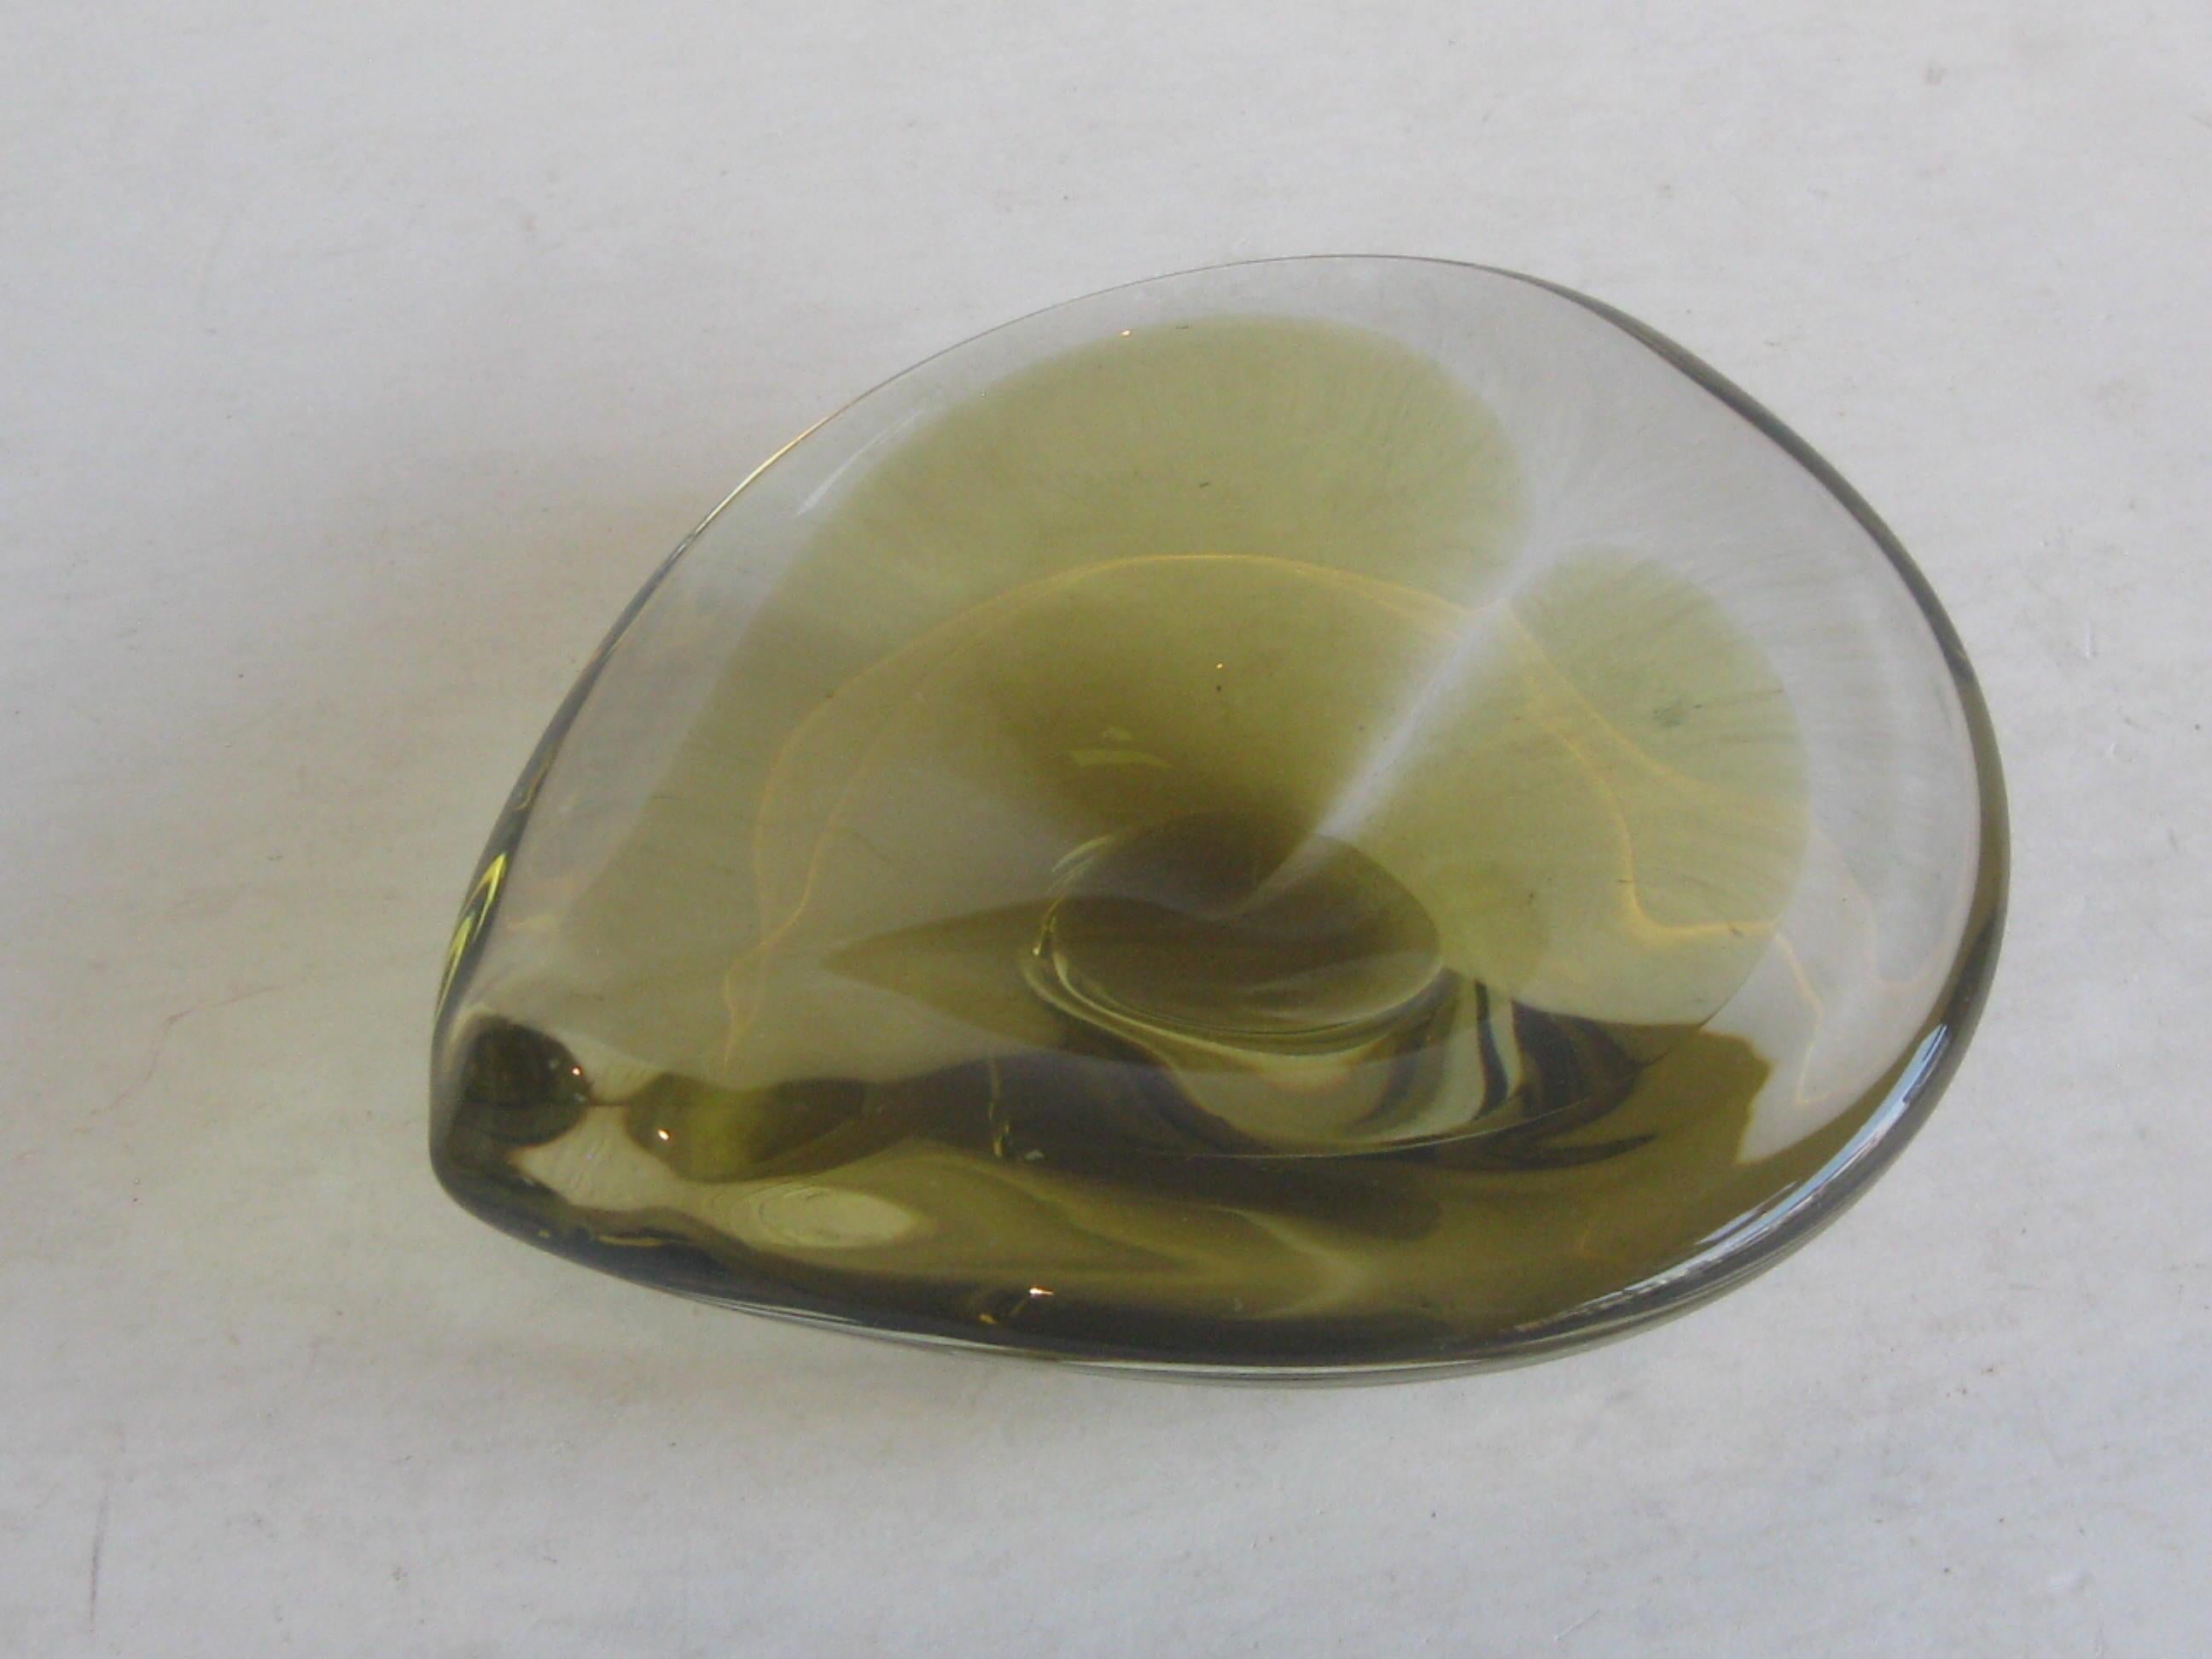 Vintage 1962 Jaakko Niemi for Nuutajarvi Finnish Art Glass Freeform Bowl Finland In Good Condition For Sale In San Diego, CA